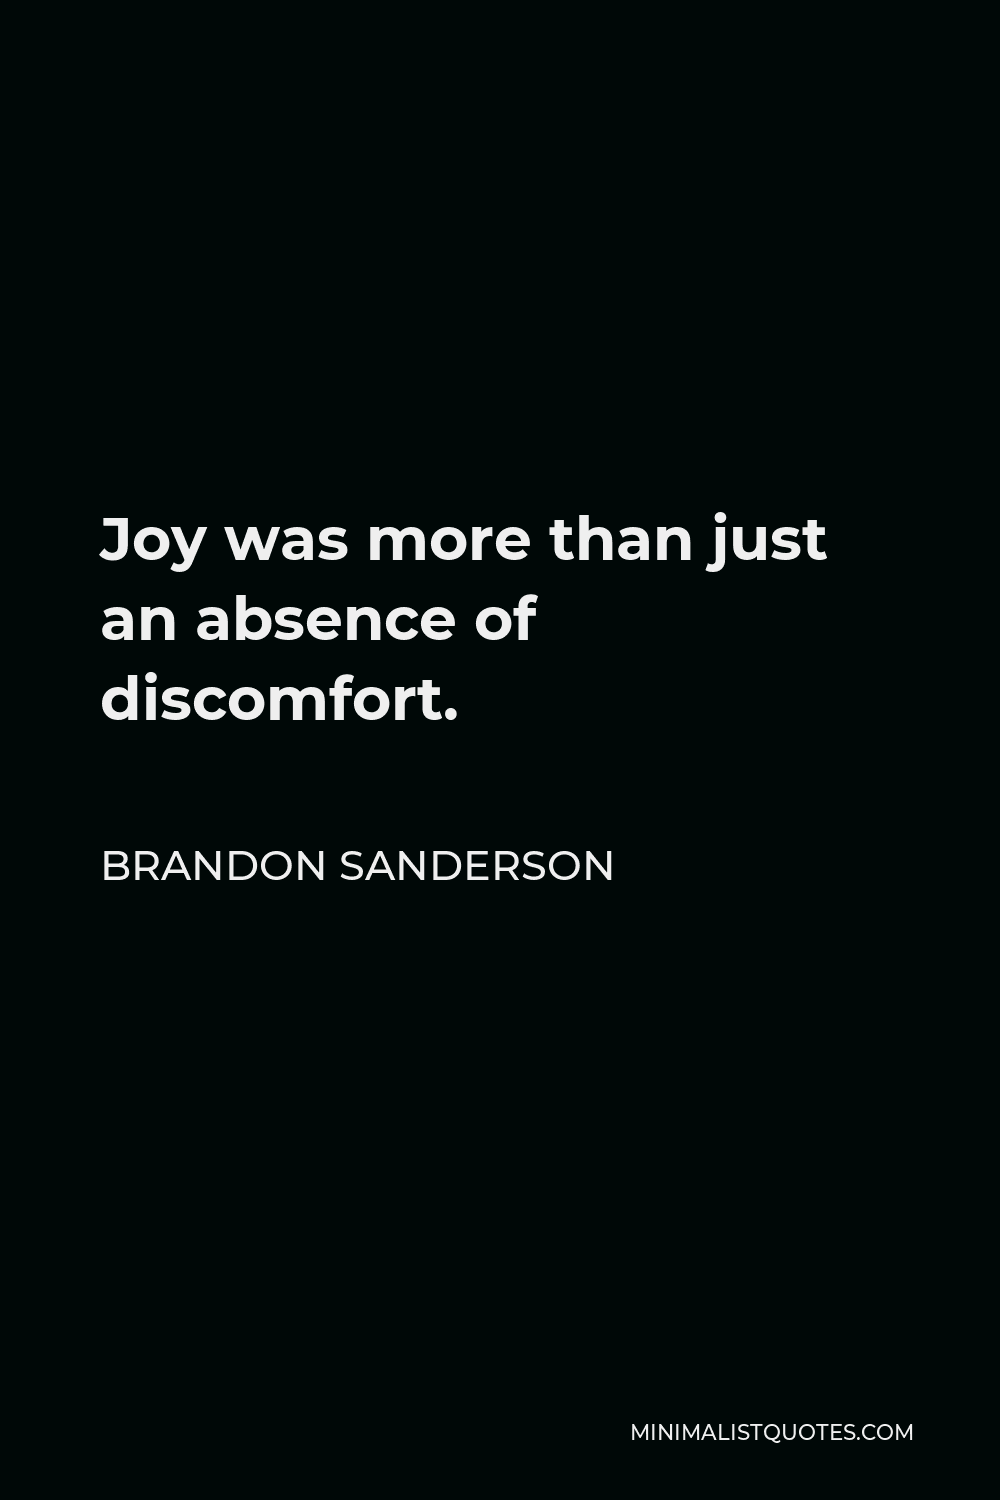 Brandon Sanderson Quote - Joy was more than just an absence of discomfort.